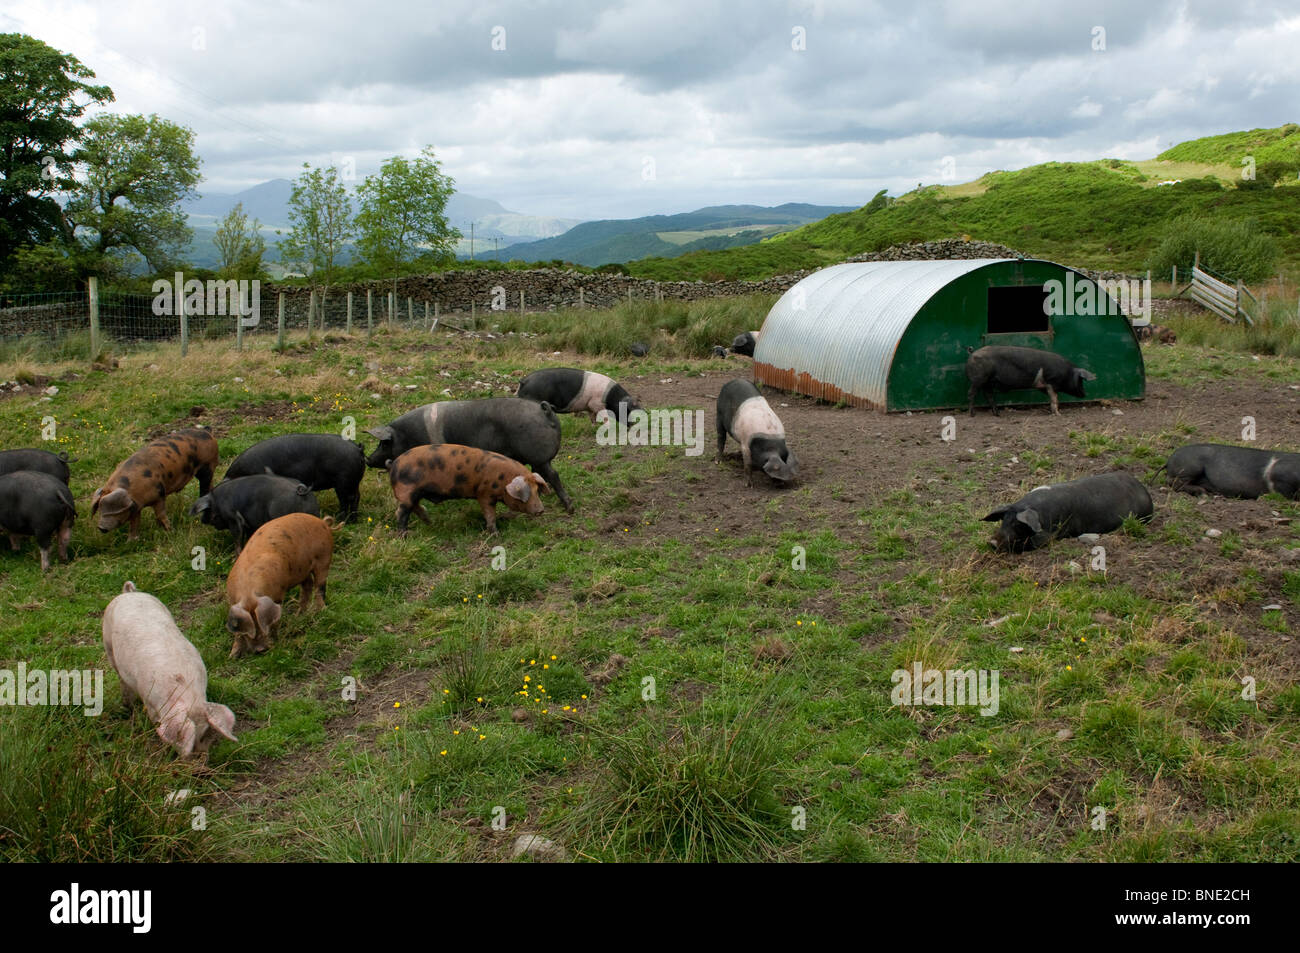 Rare breed pigs in traditional Arc houses in pasture. Stock Photo